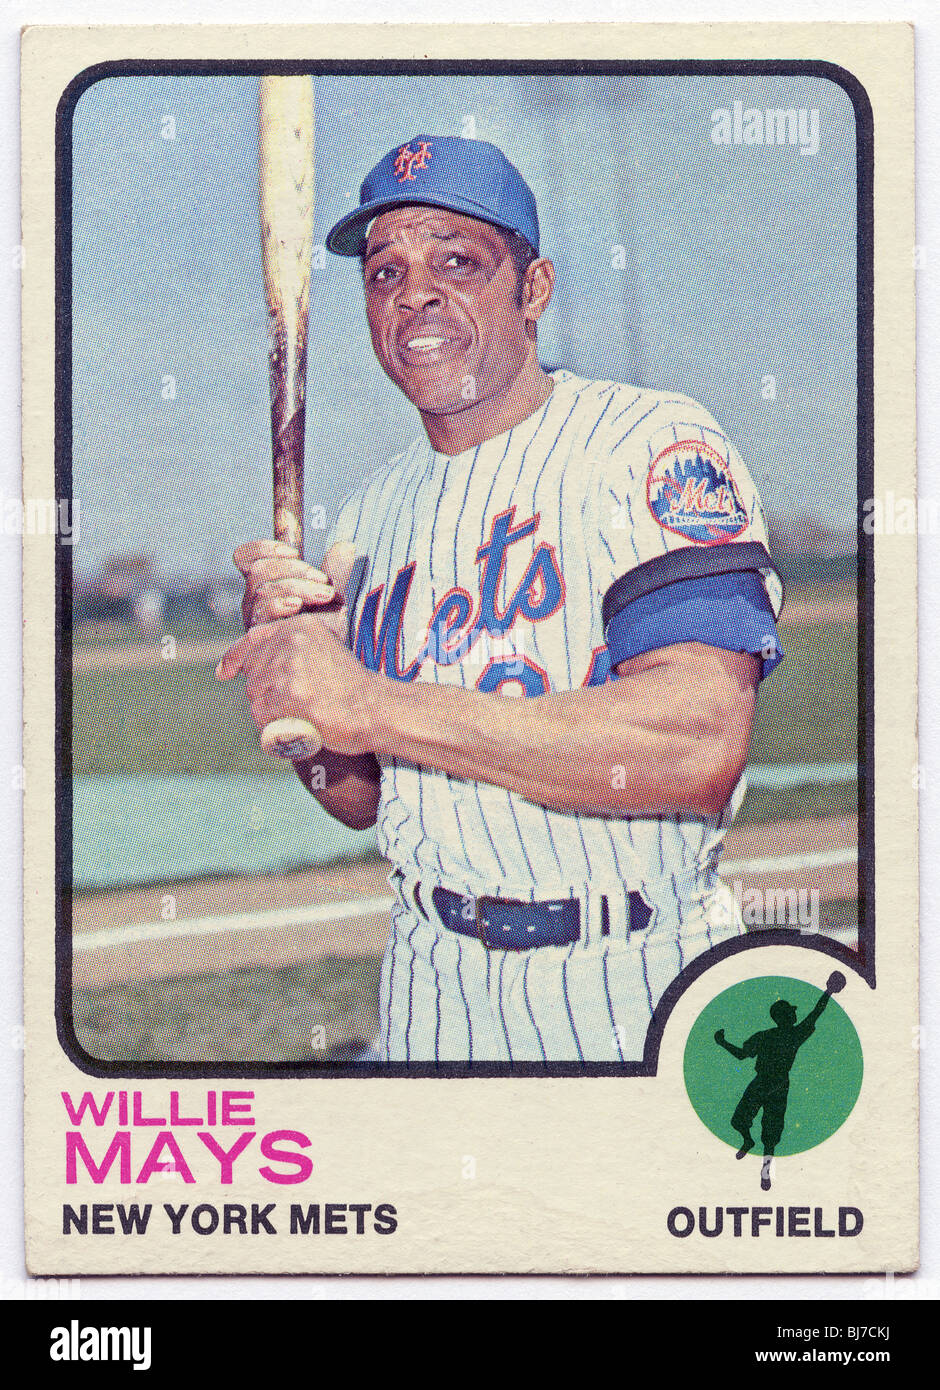 Collectible baseball card - Willie Mays of New York Mets Stock Photo. 